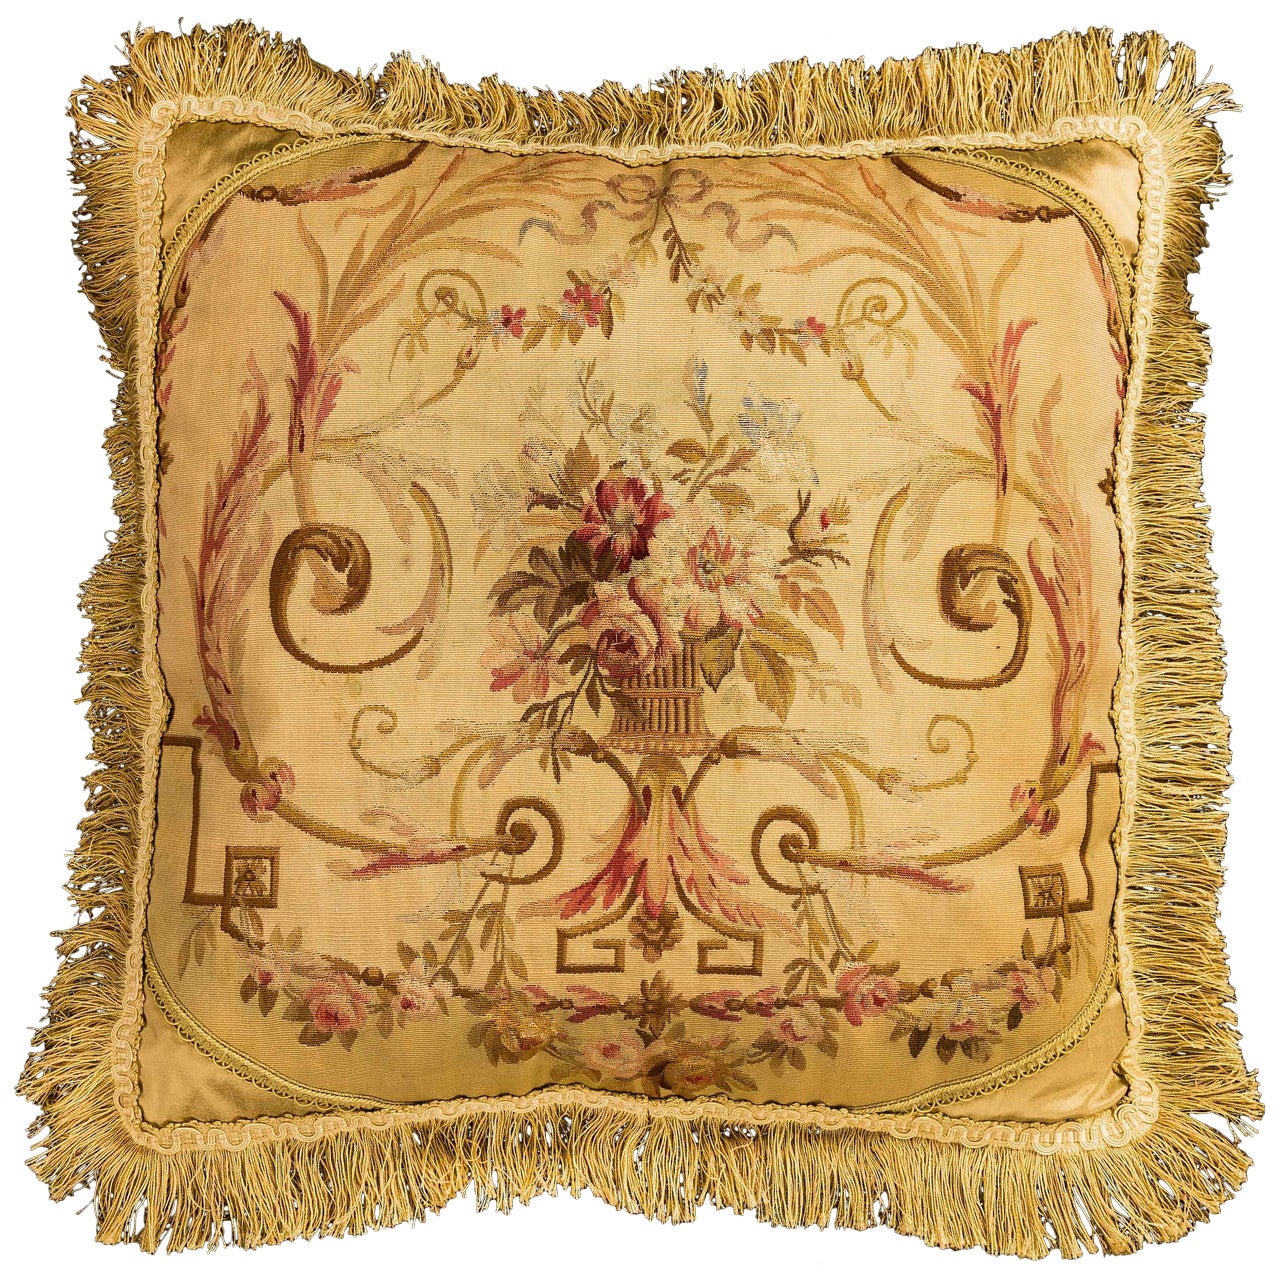 Cushion: Late 18th Century, Wool. Flowers in a Old Gold Framework